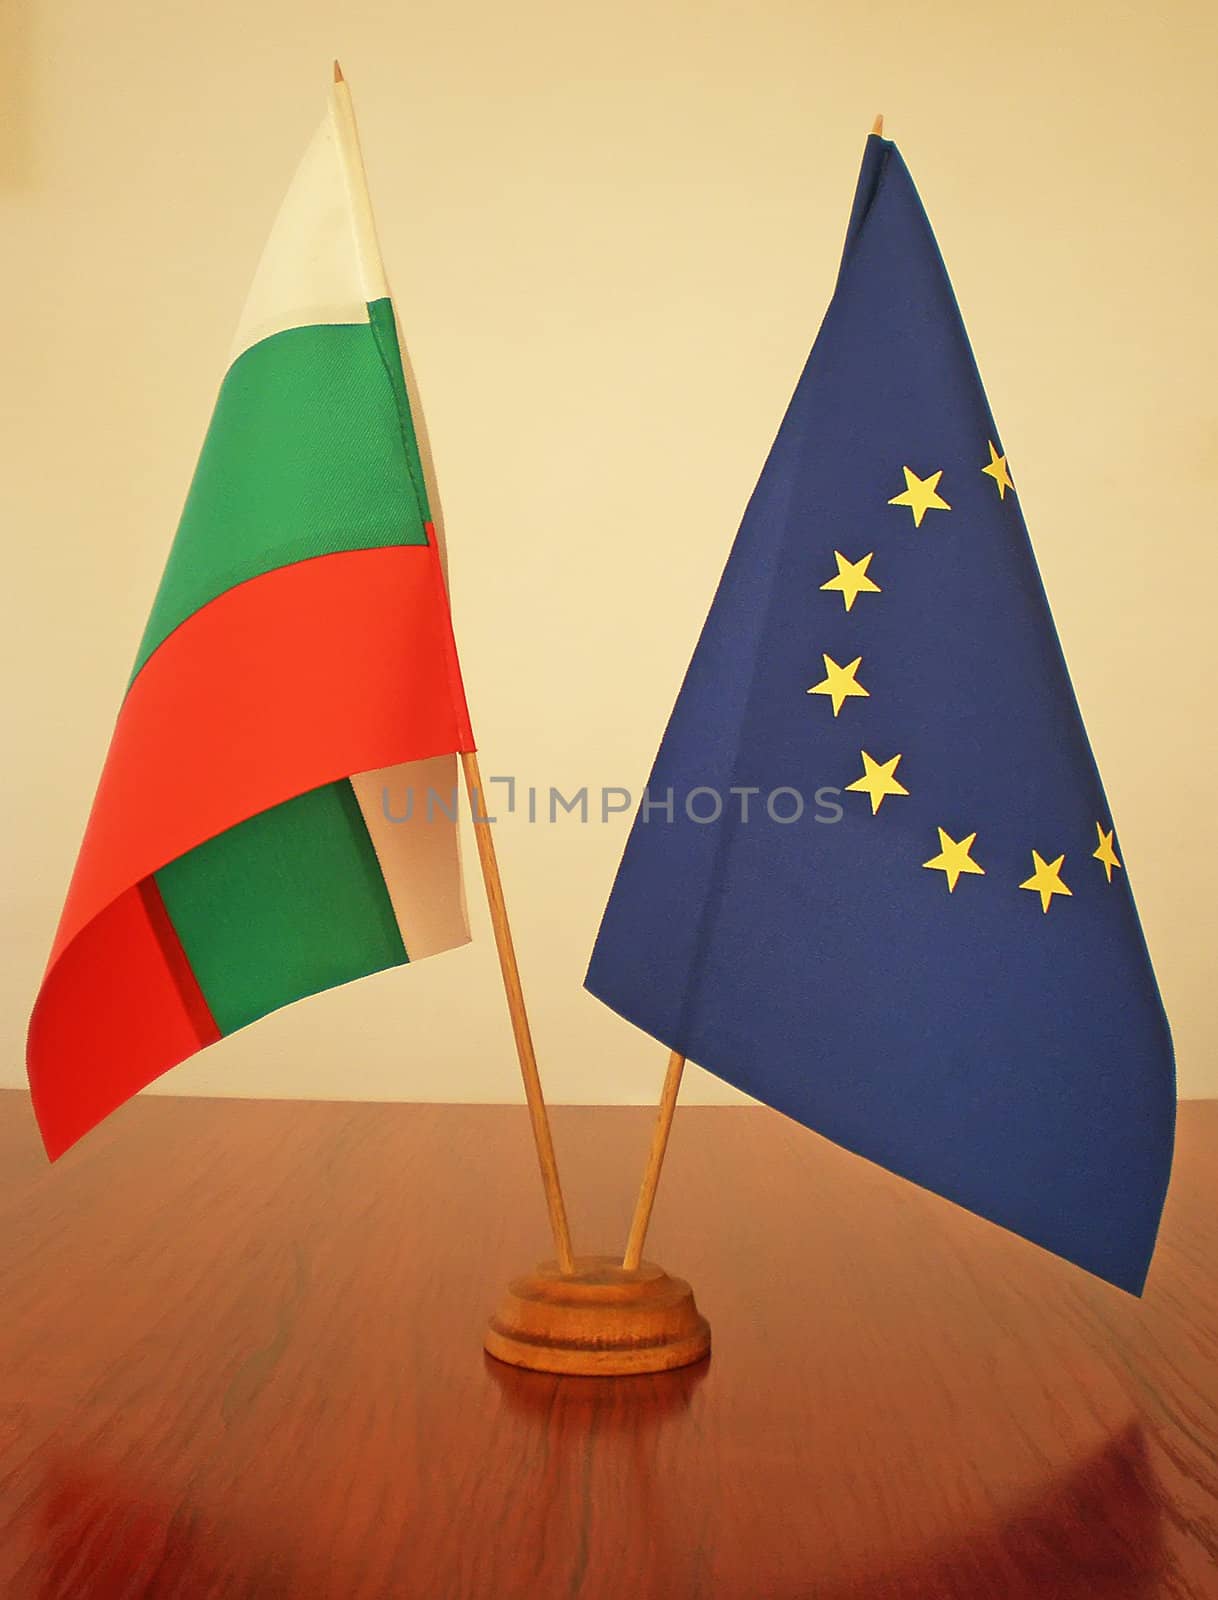 bulgarian and european flags on a wooden table     